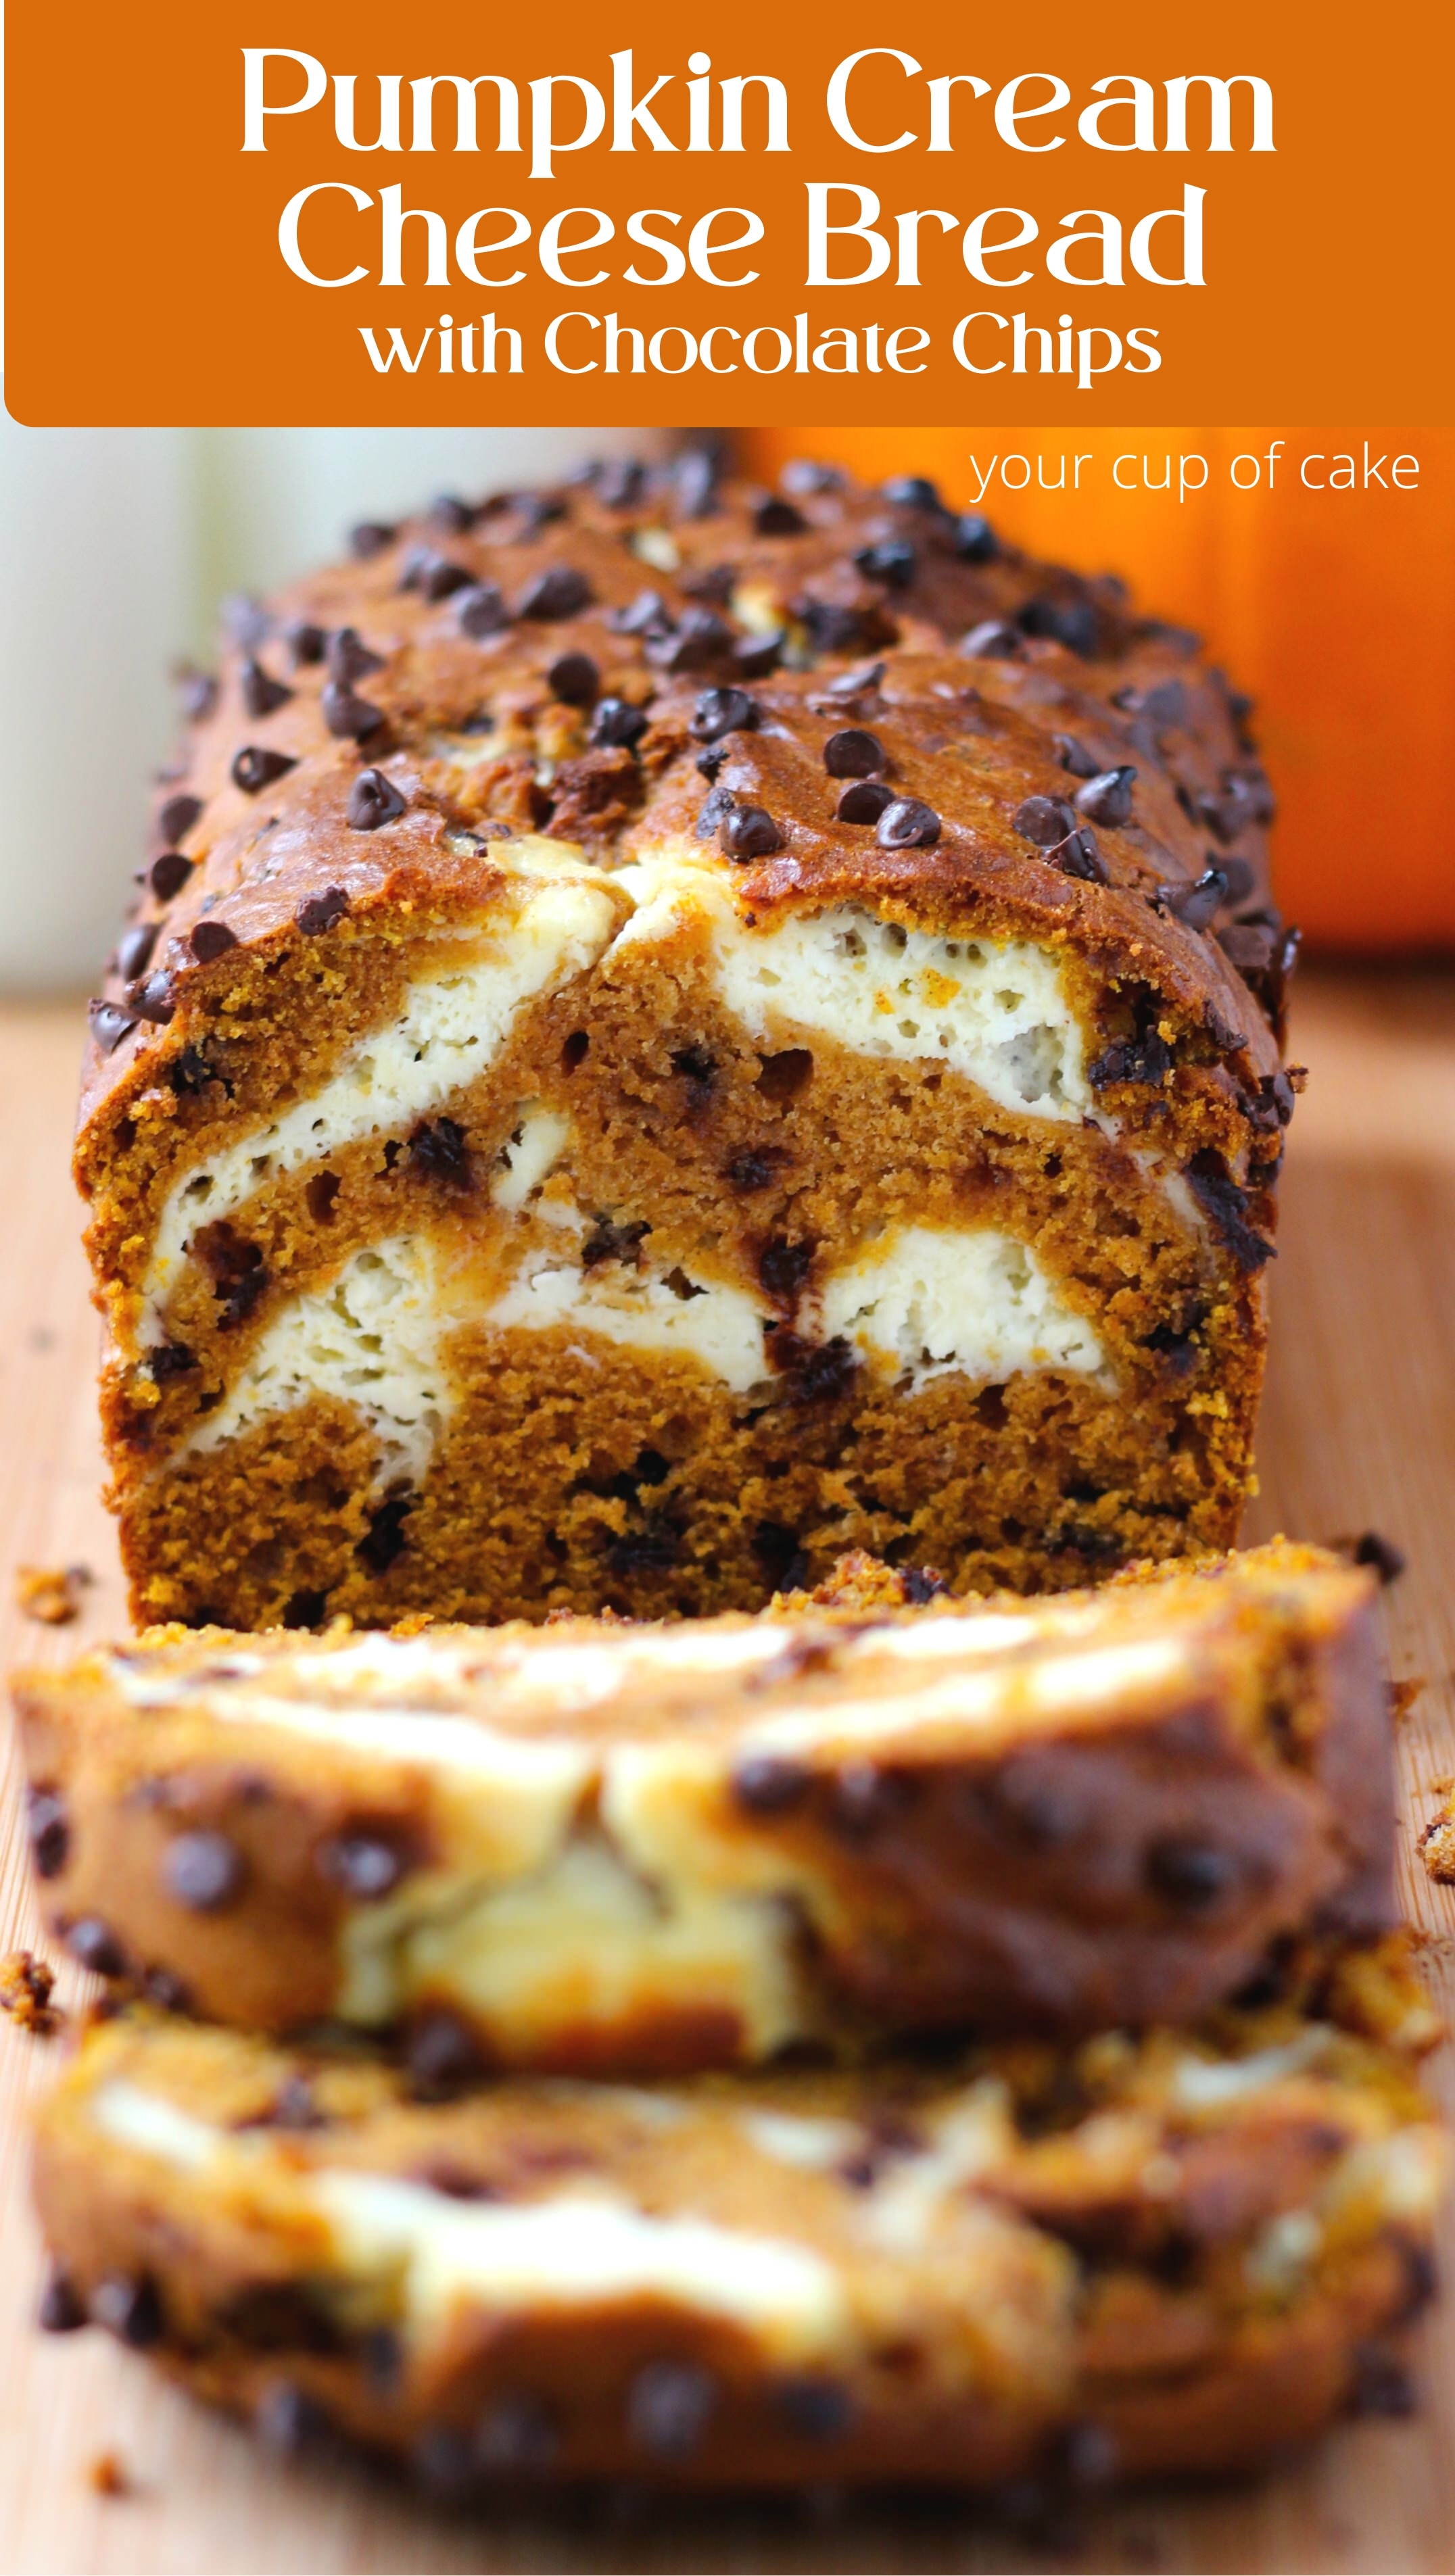 Pumpkin Cream Cheese Bread and Muffins - Your Cup of Cake